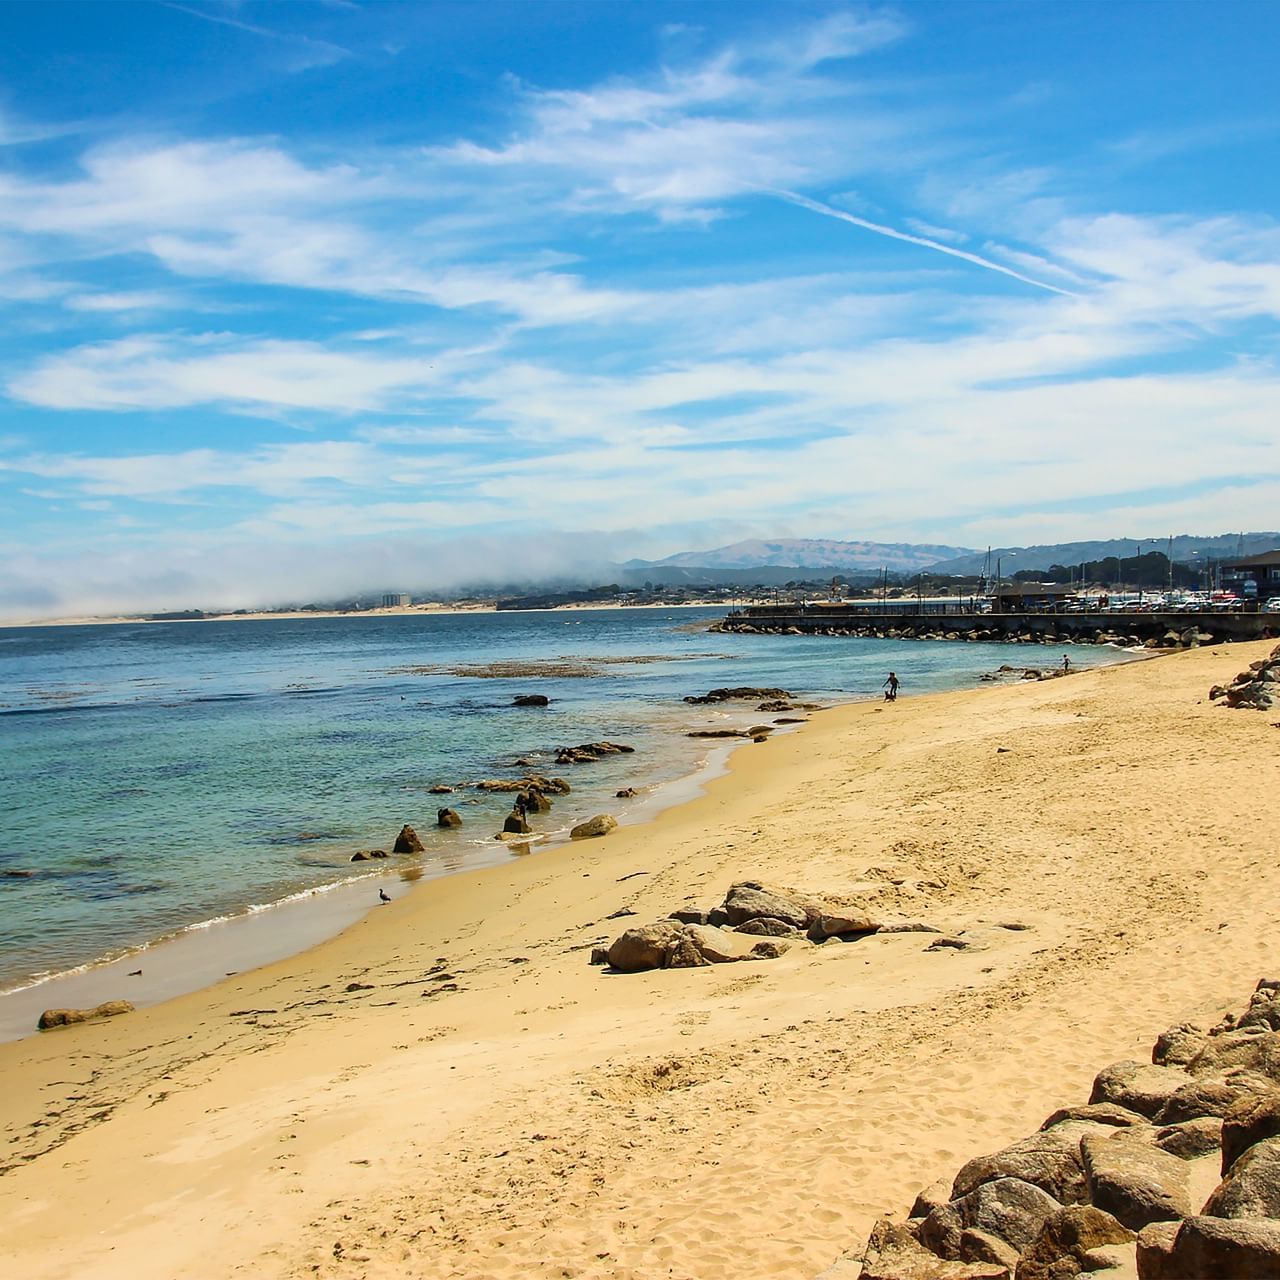 A beautiful photo of a Monterey beach on a sunny day